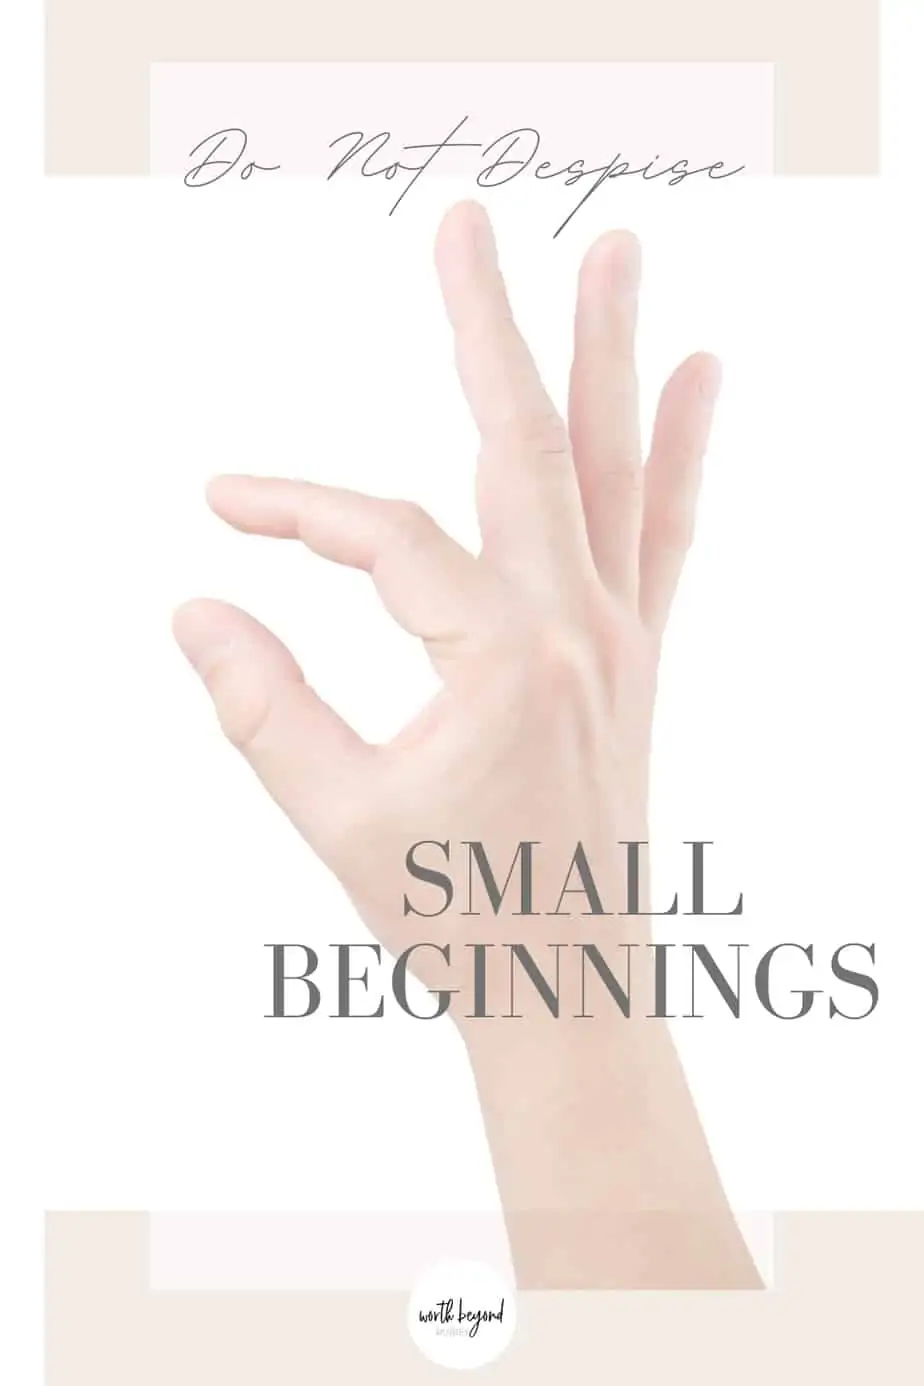 fingers making the symbol for small and text that says Do Not Despise Small Beginnings